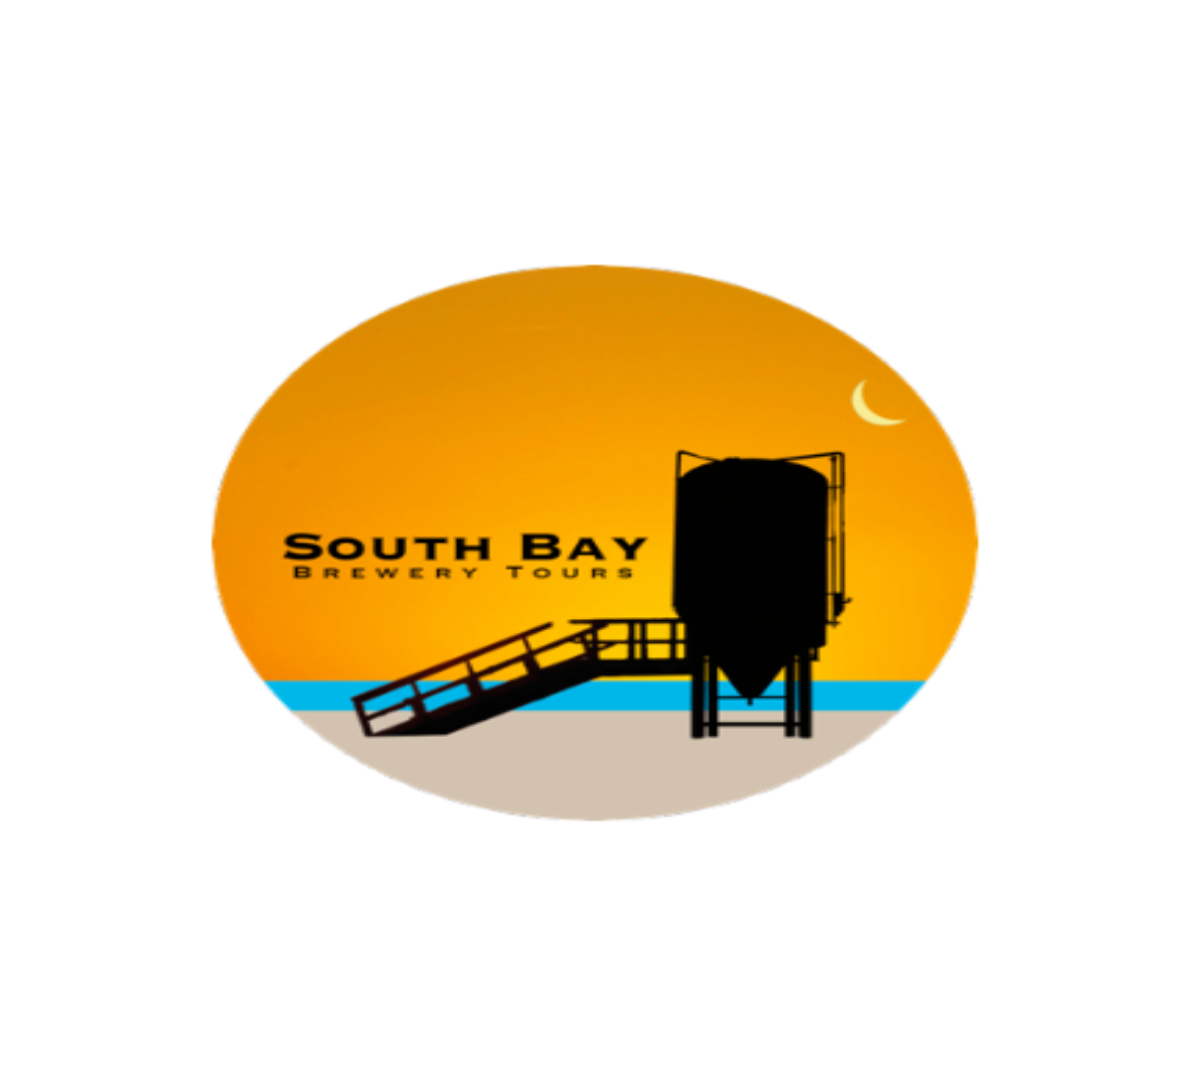 South Bay Brewery Tours